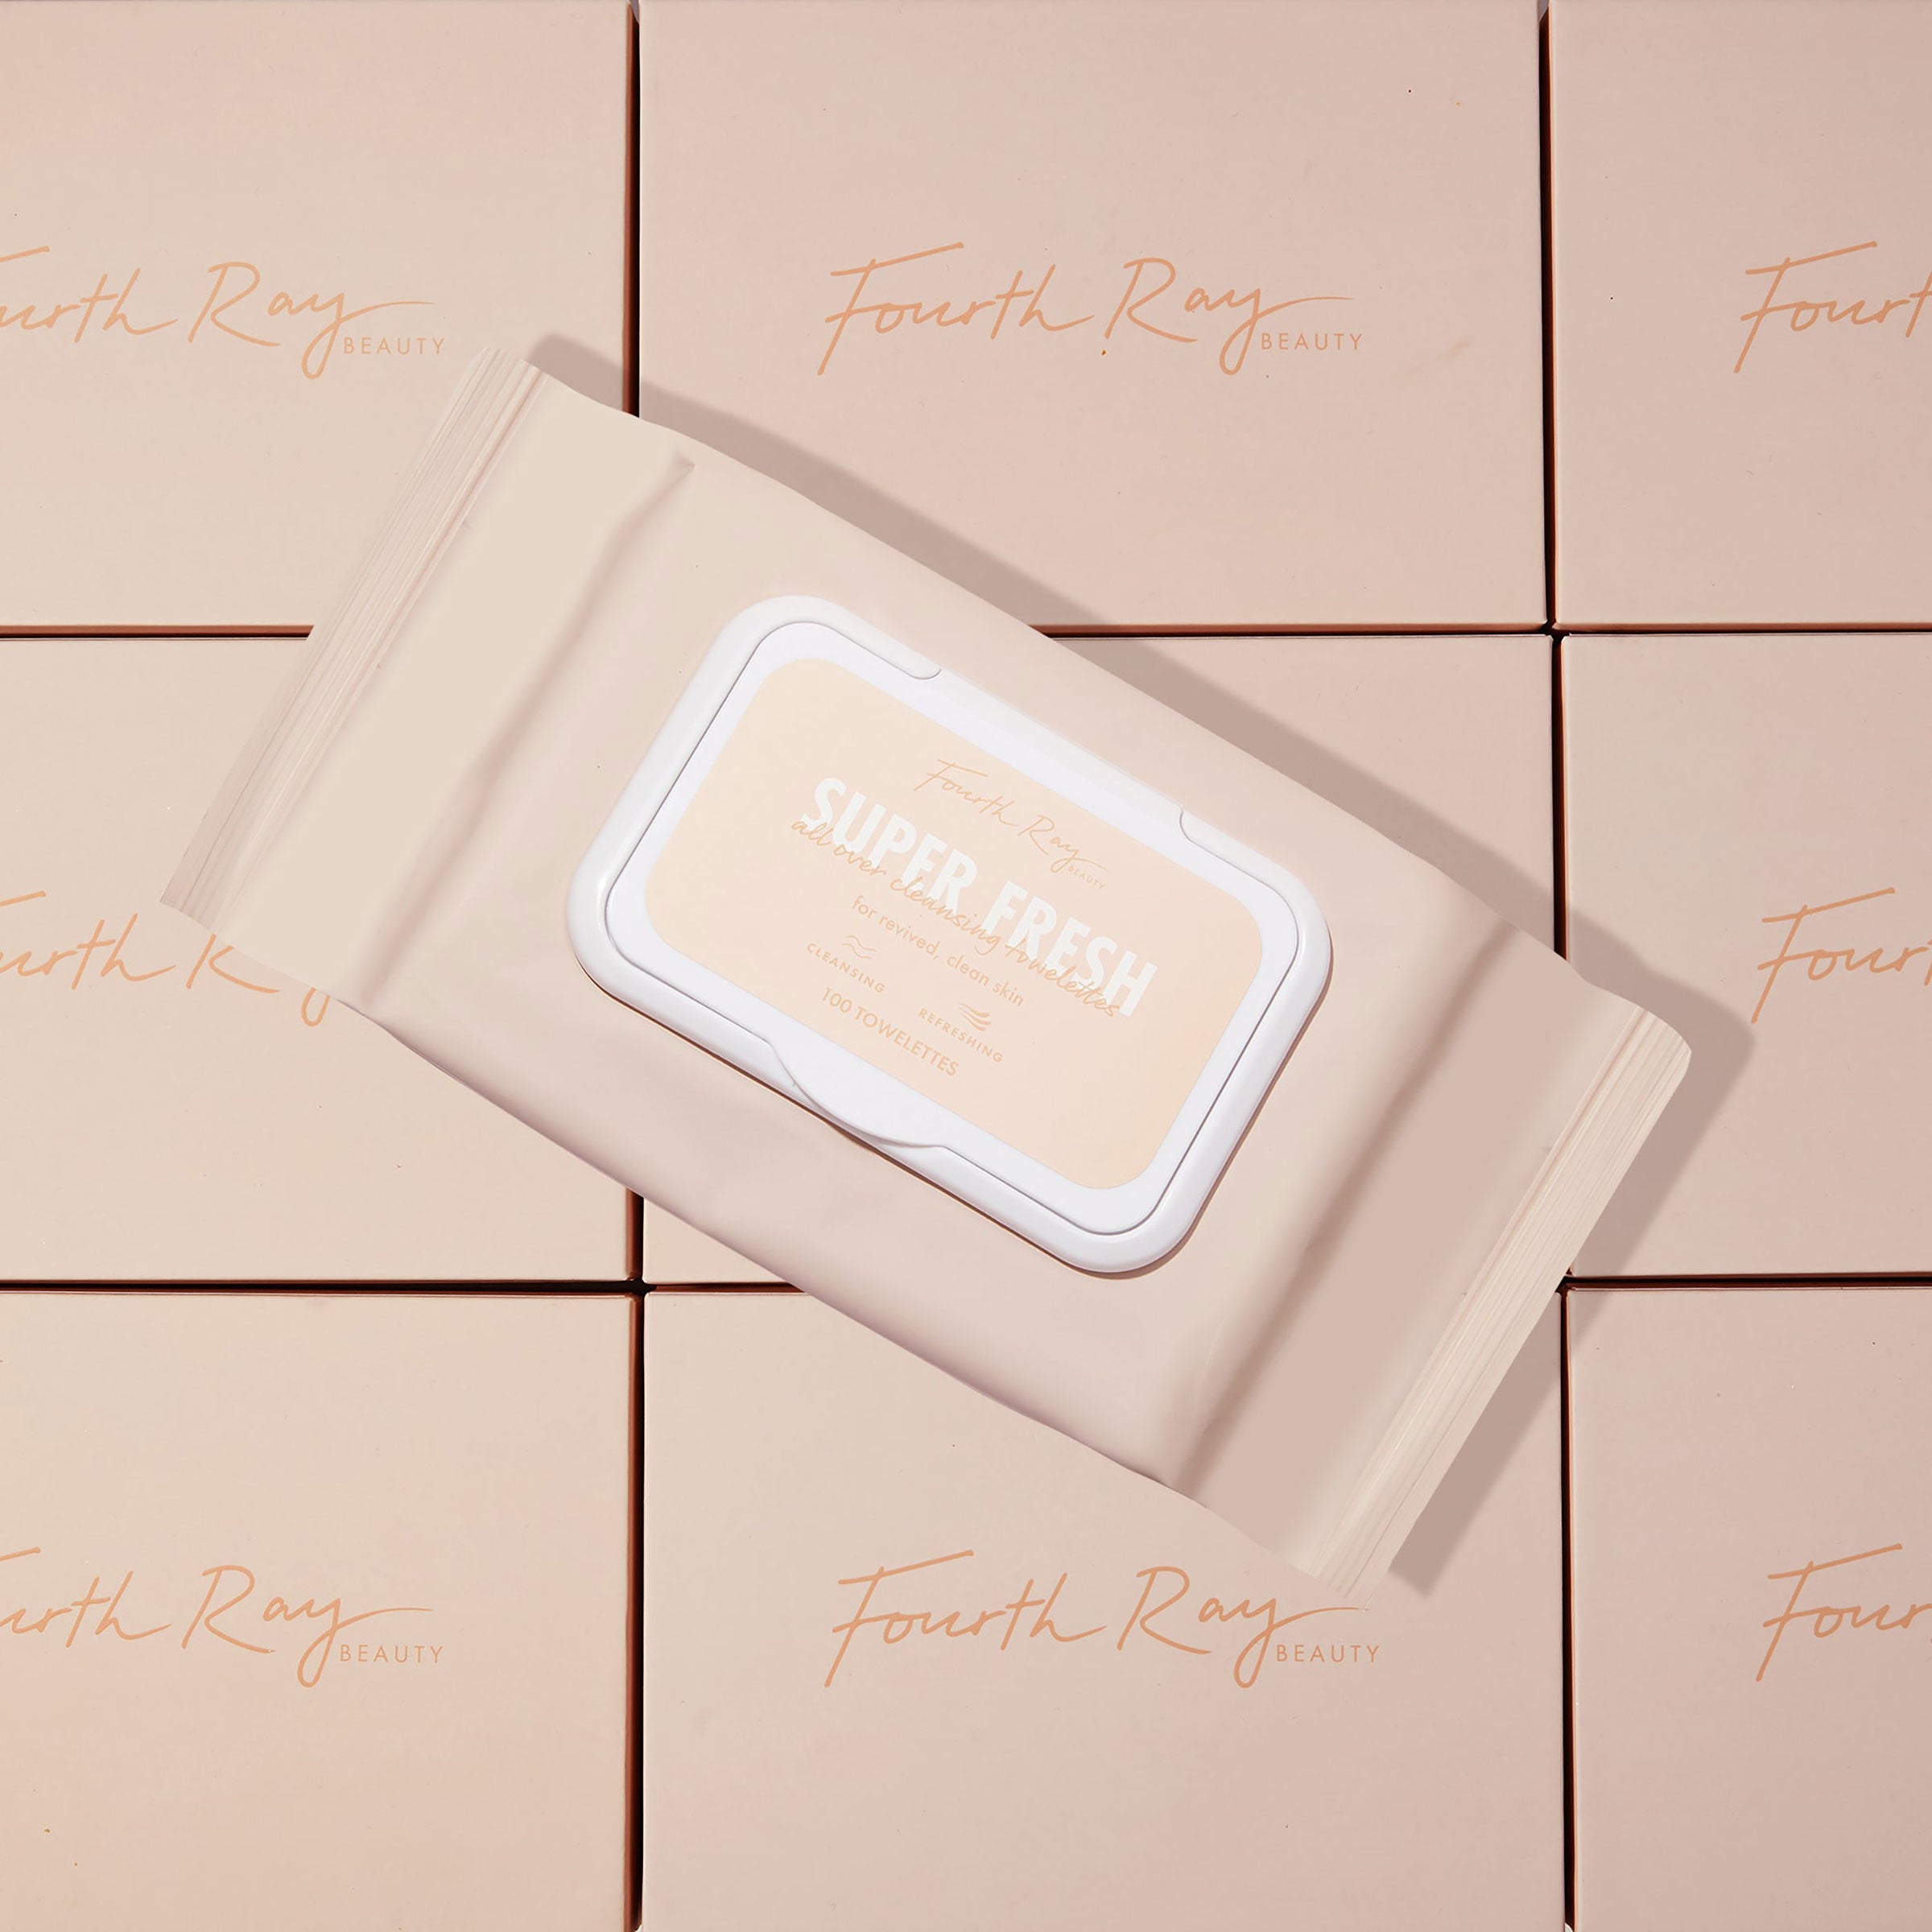 Fourth Ray Beauty Super Fresh All Over Cleansing Towelettes